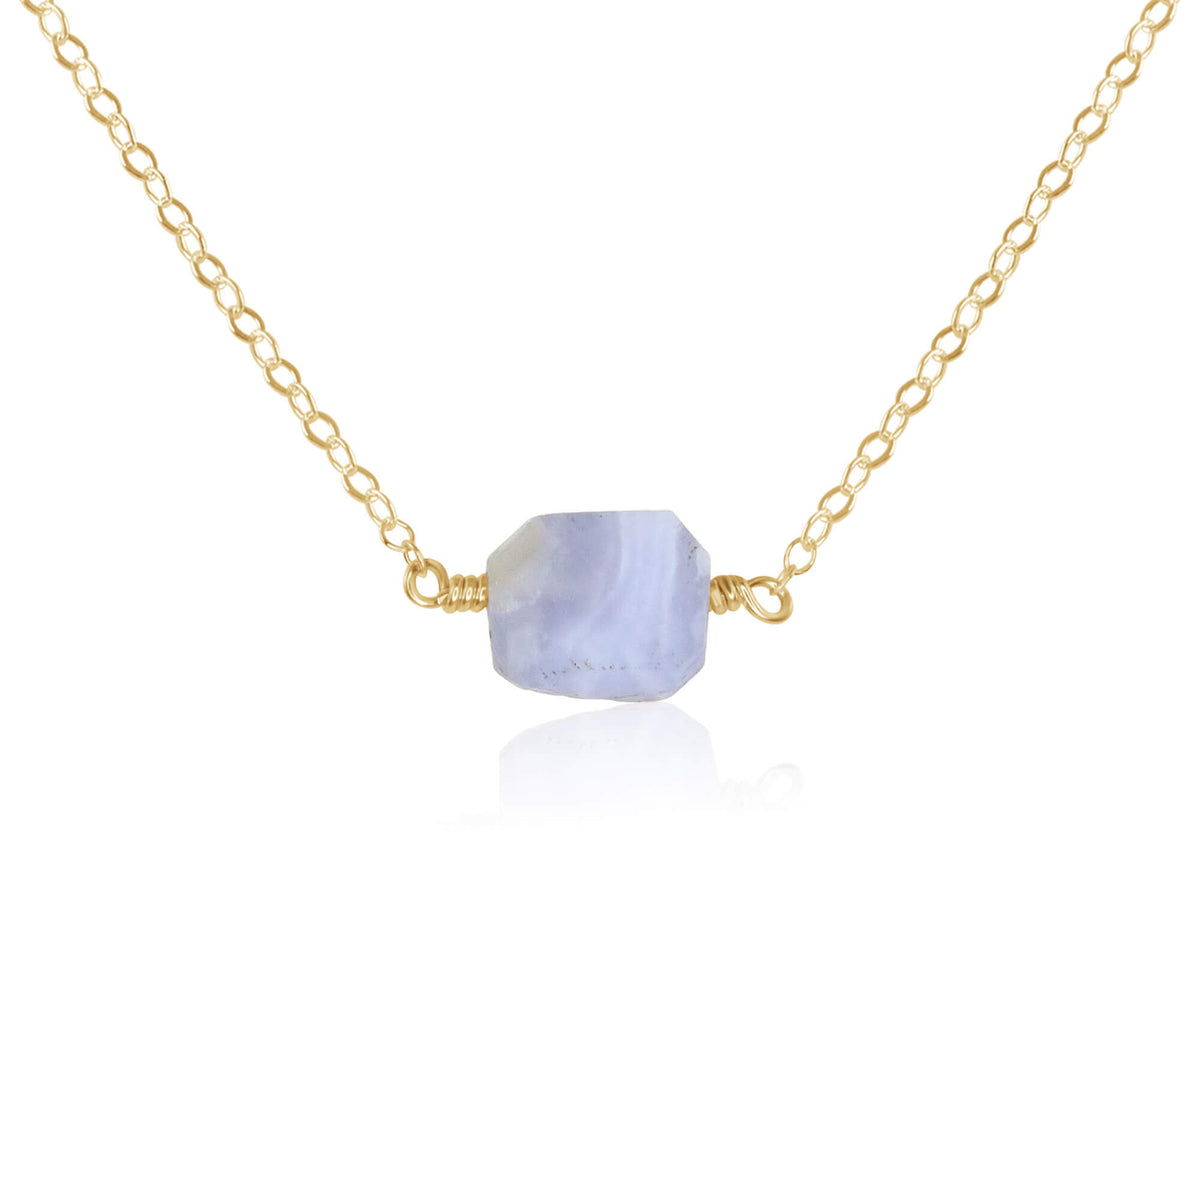 Raw Nugget Necklace - Blue Lace Agate - 14K Gold Fill - Luna Tide Handmade Jewellery